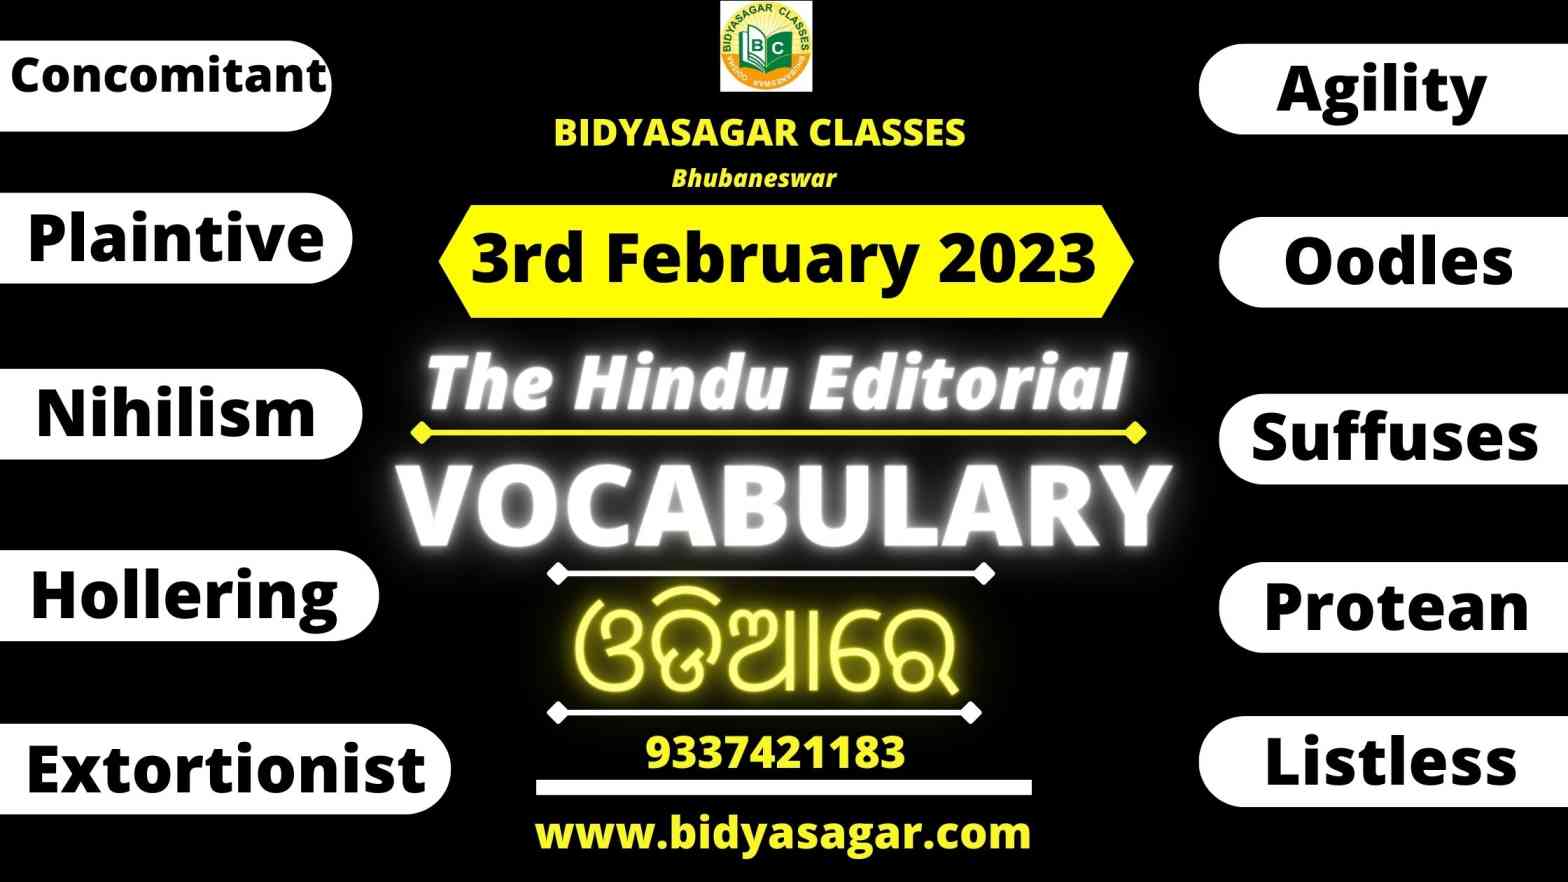 The Hindu Editorial Vocabulary of 3rd February 2023